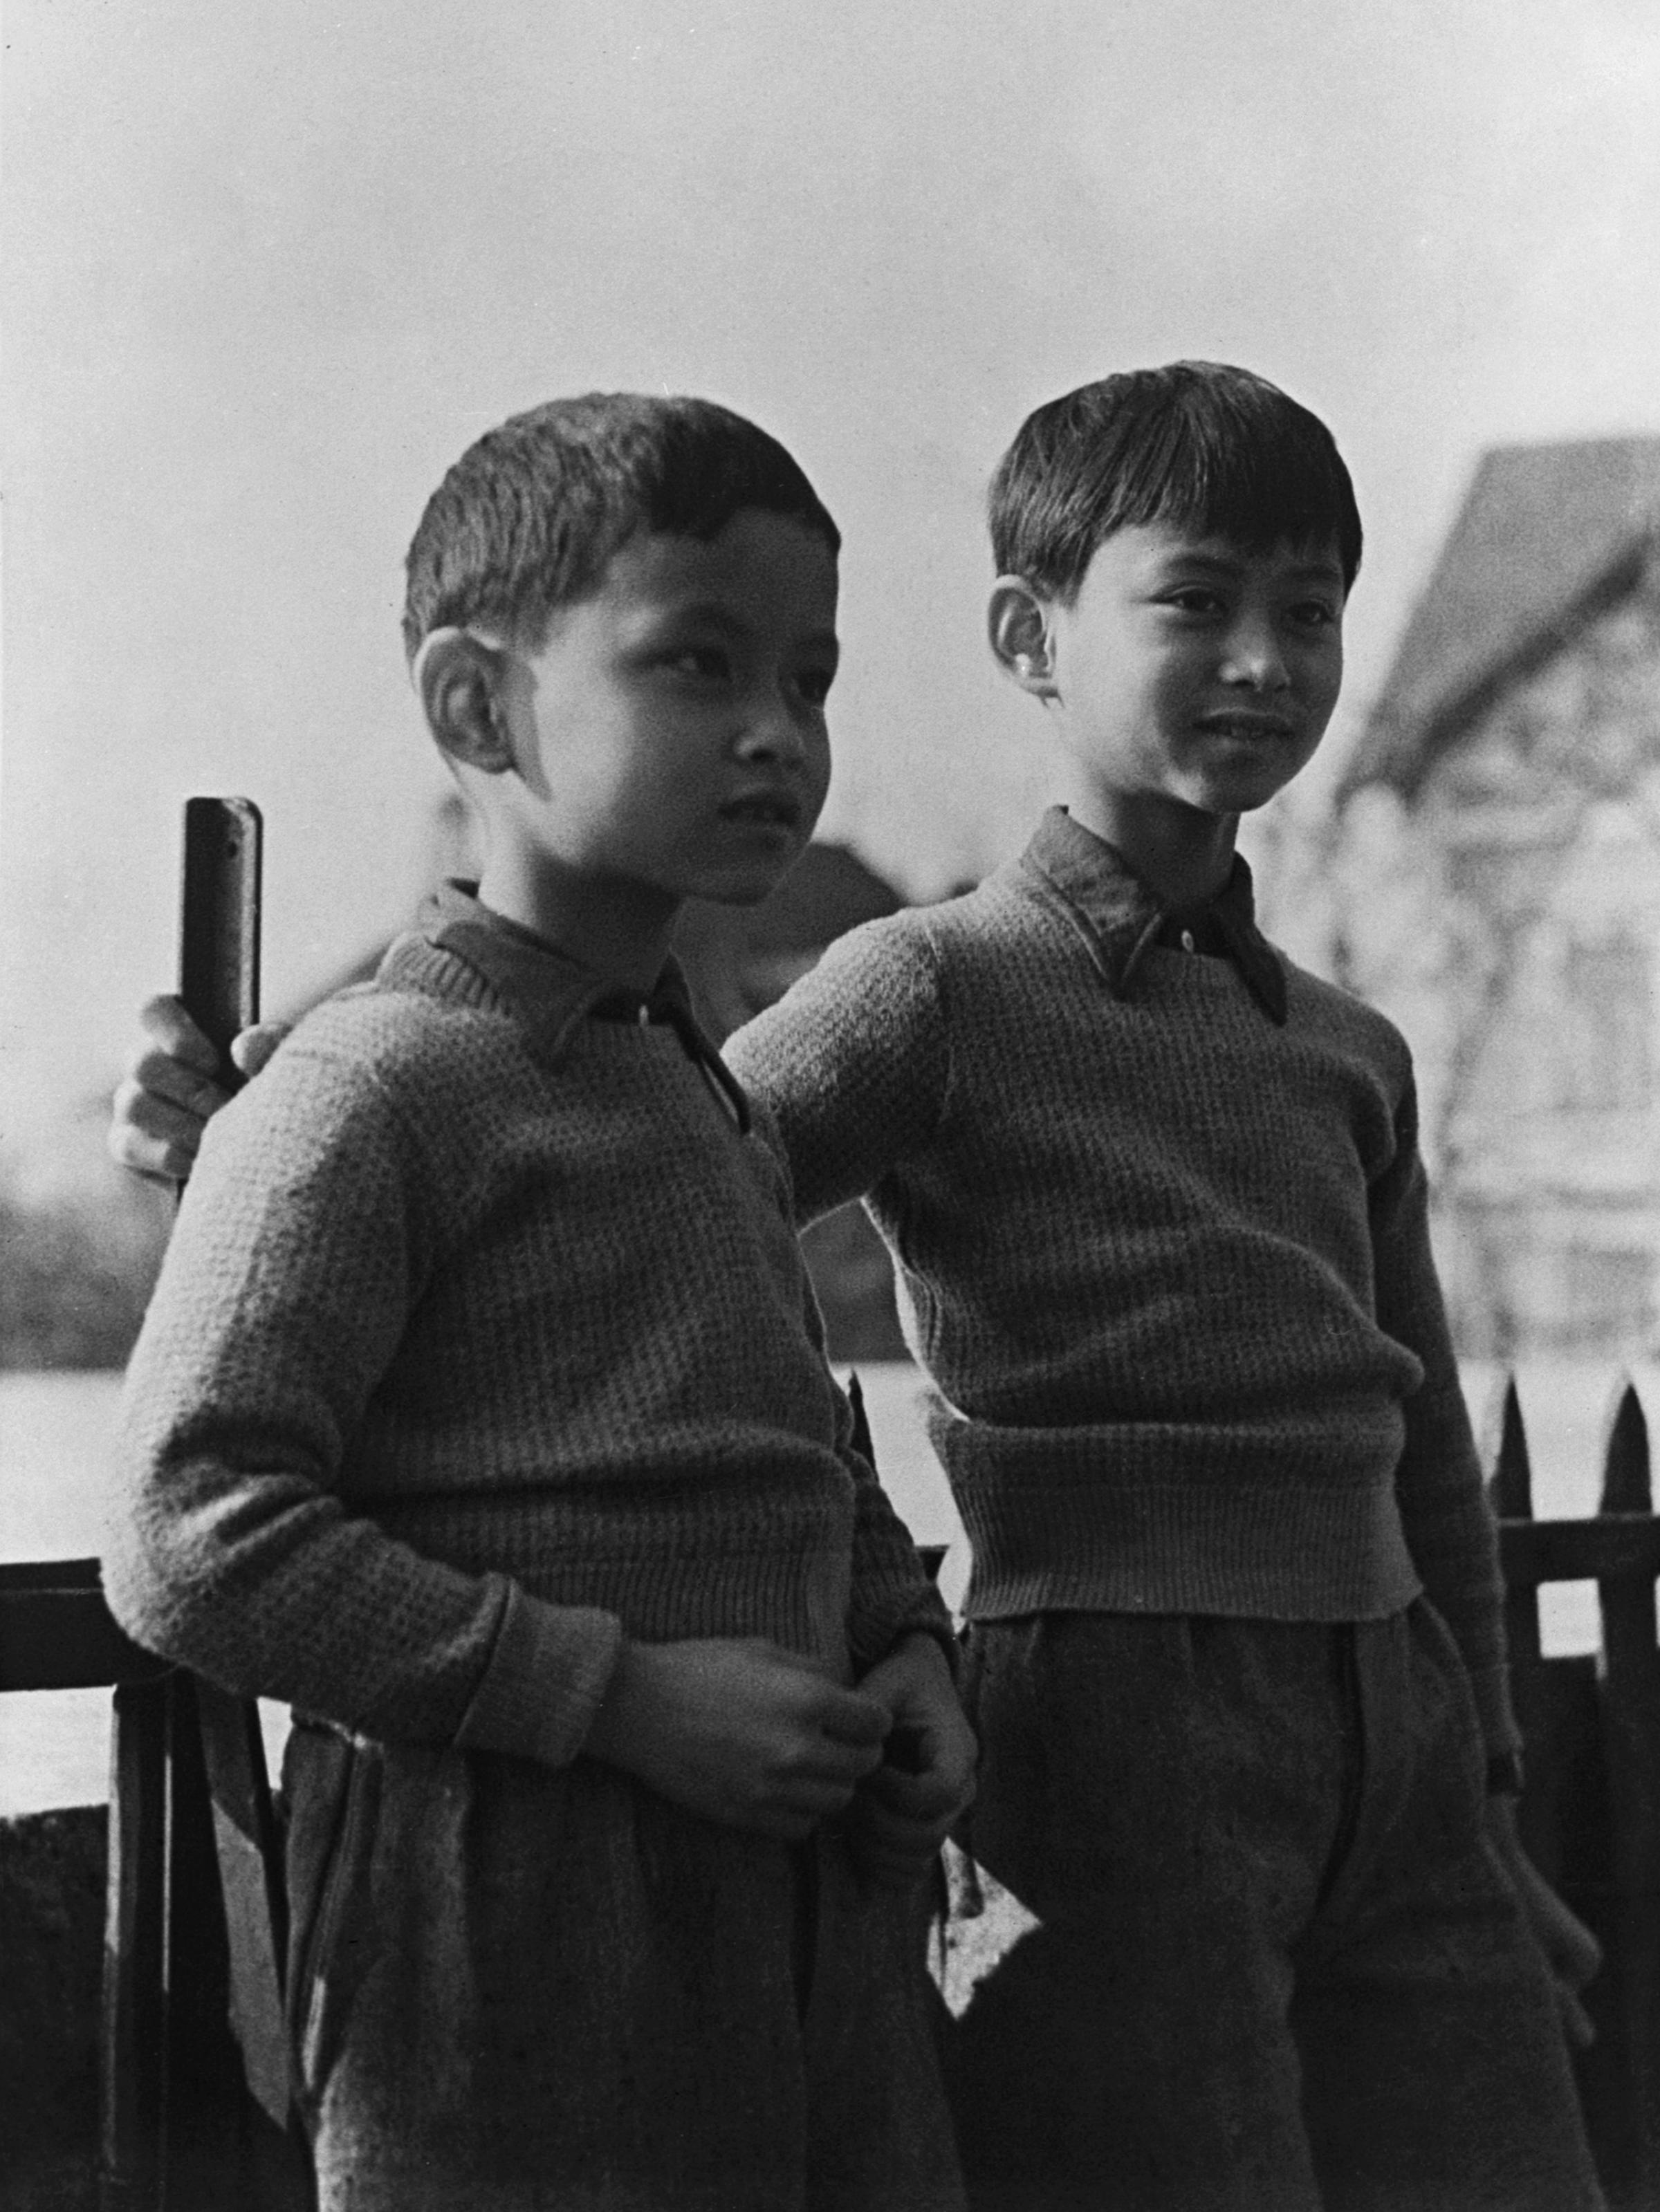 Prince Bhumibol (left), now King Bhumibol Adulyadej, with his brother Prince Ananda in Lausanne, Switzerland, March 7, 1935.